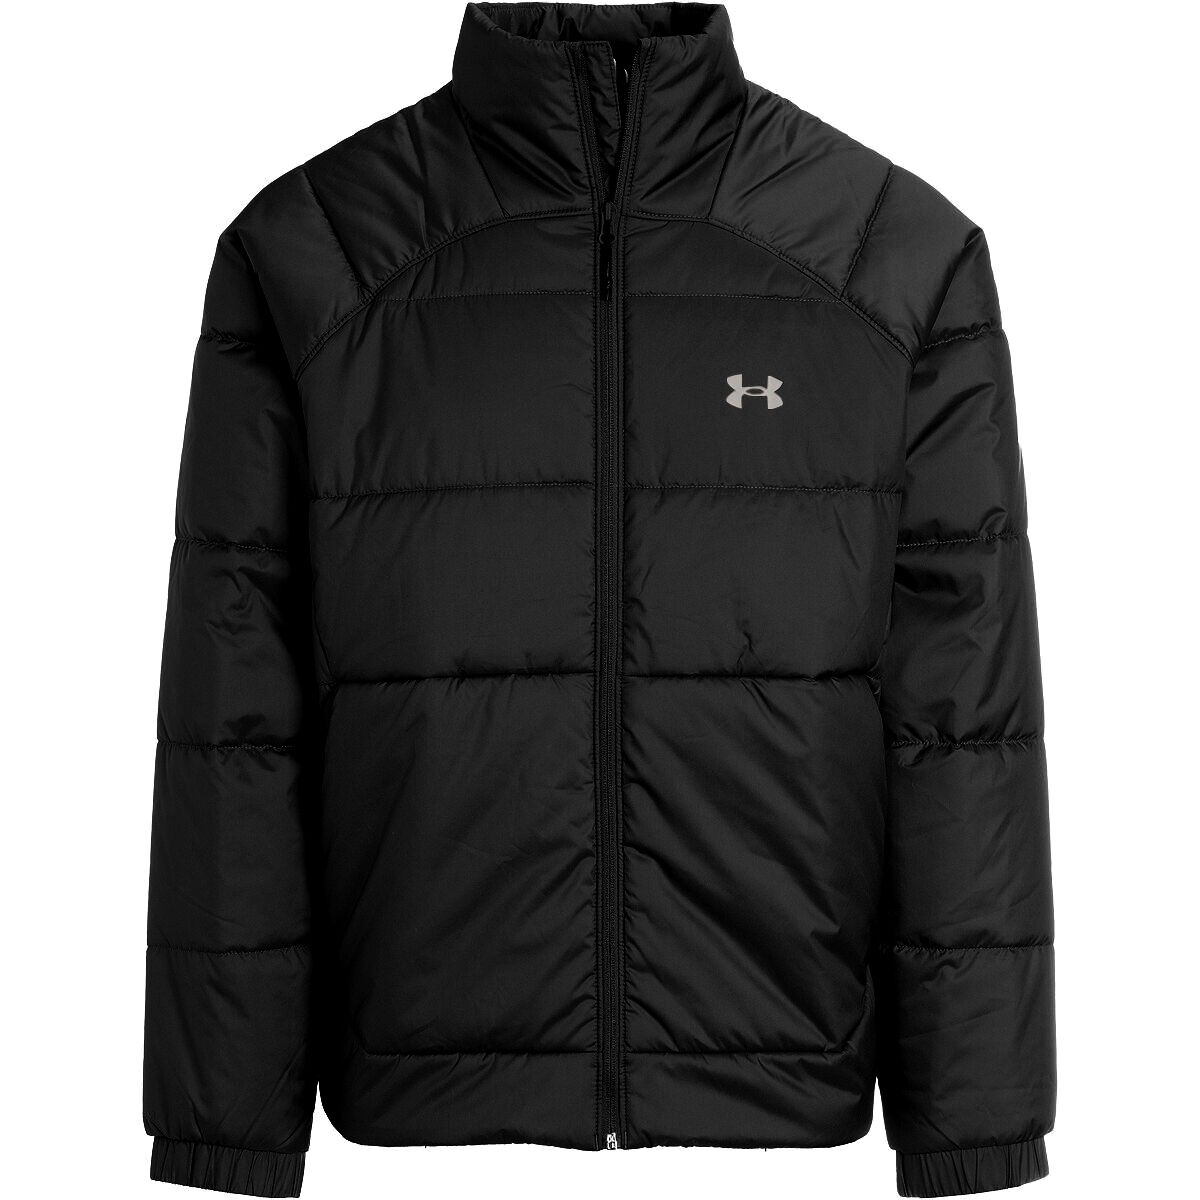 Under Armour Insulate Hooded Jacket - Men's